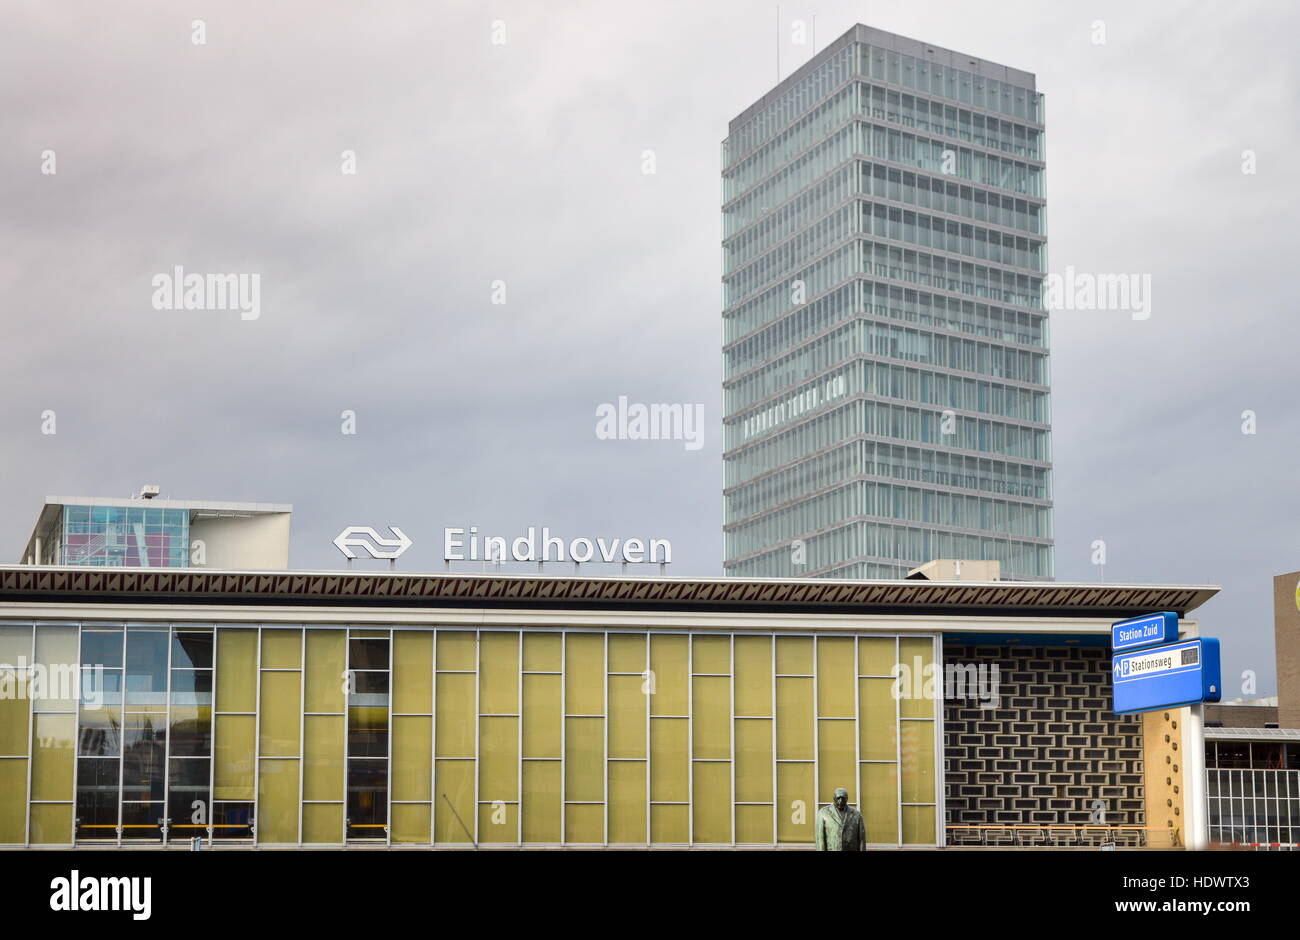 Eindhoven, the Netherlands - 15.09.2015: View at the main train station, with high business building rising behind Stock Photo